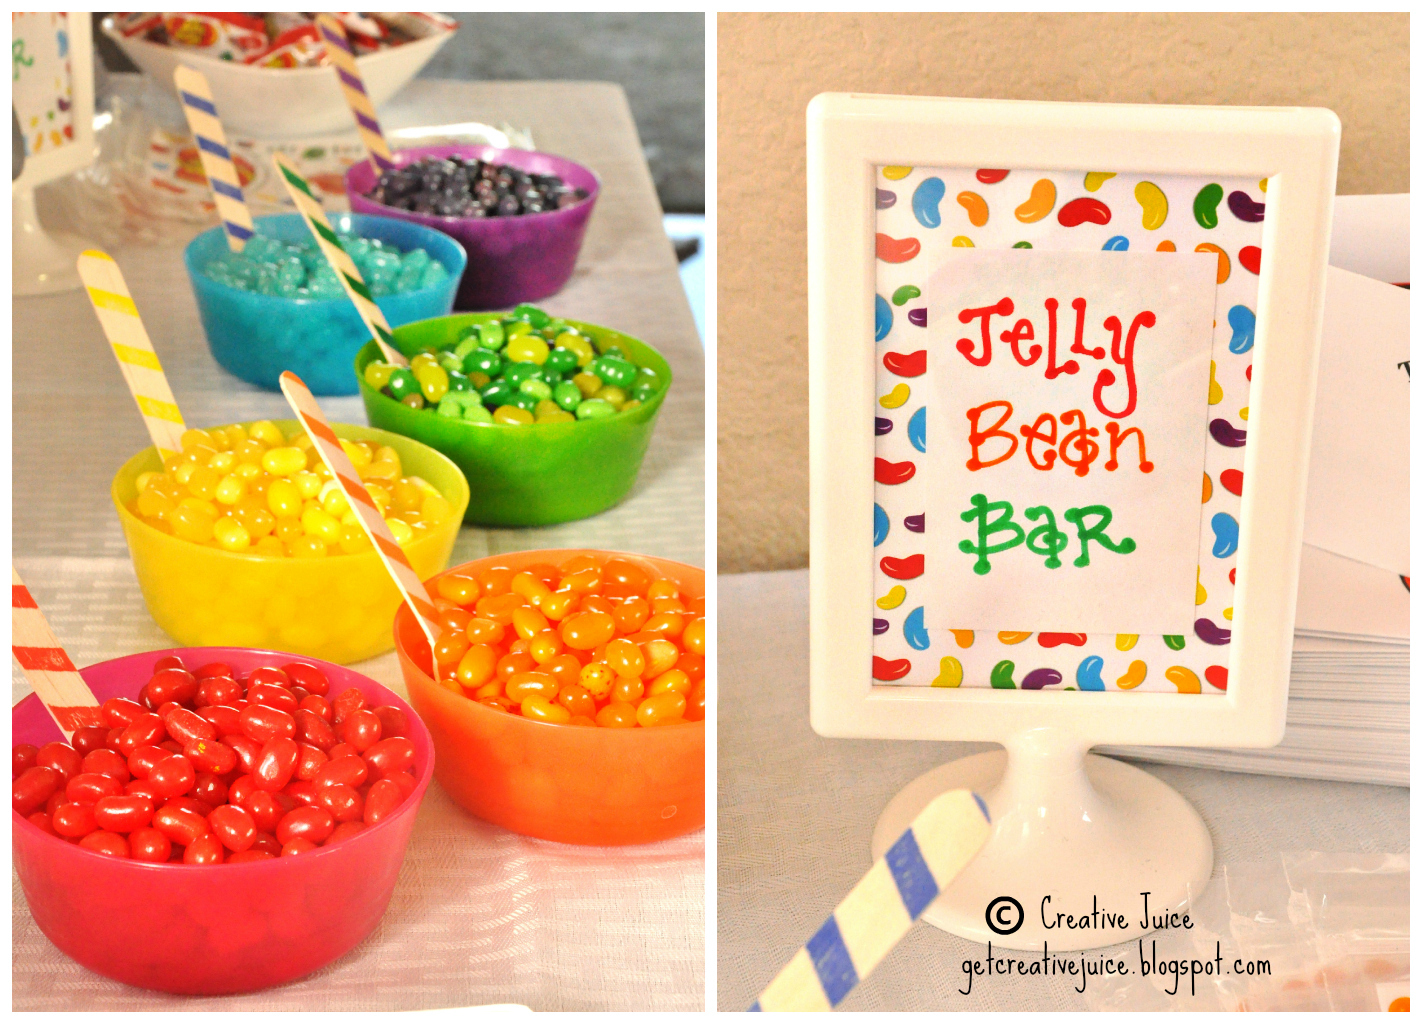 Jellybeans Sweets Birthday Customised Card 